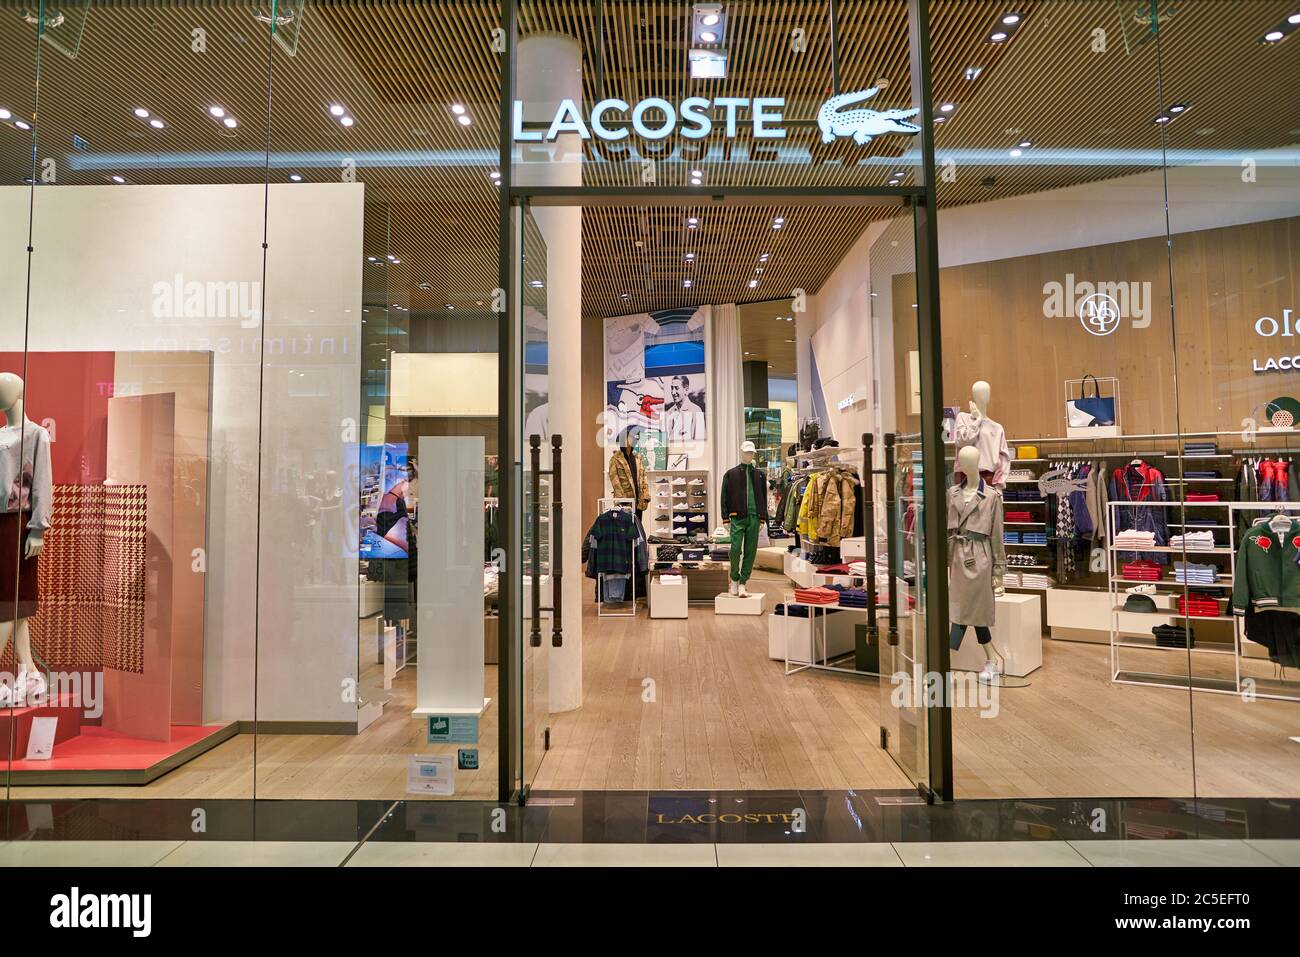 lacoste outlet stores,Quality assurance,protein-burger.com